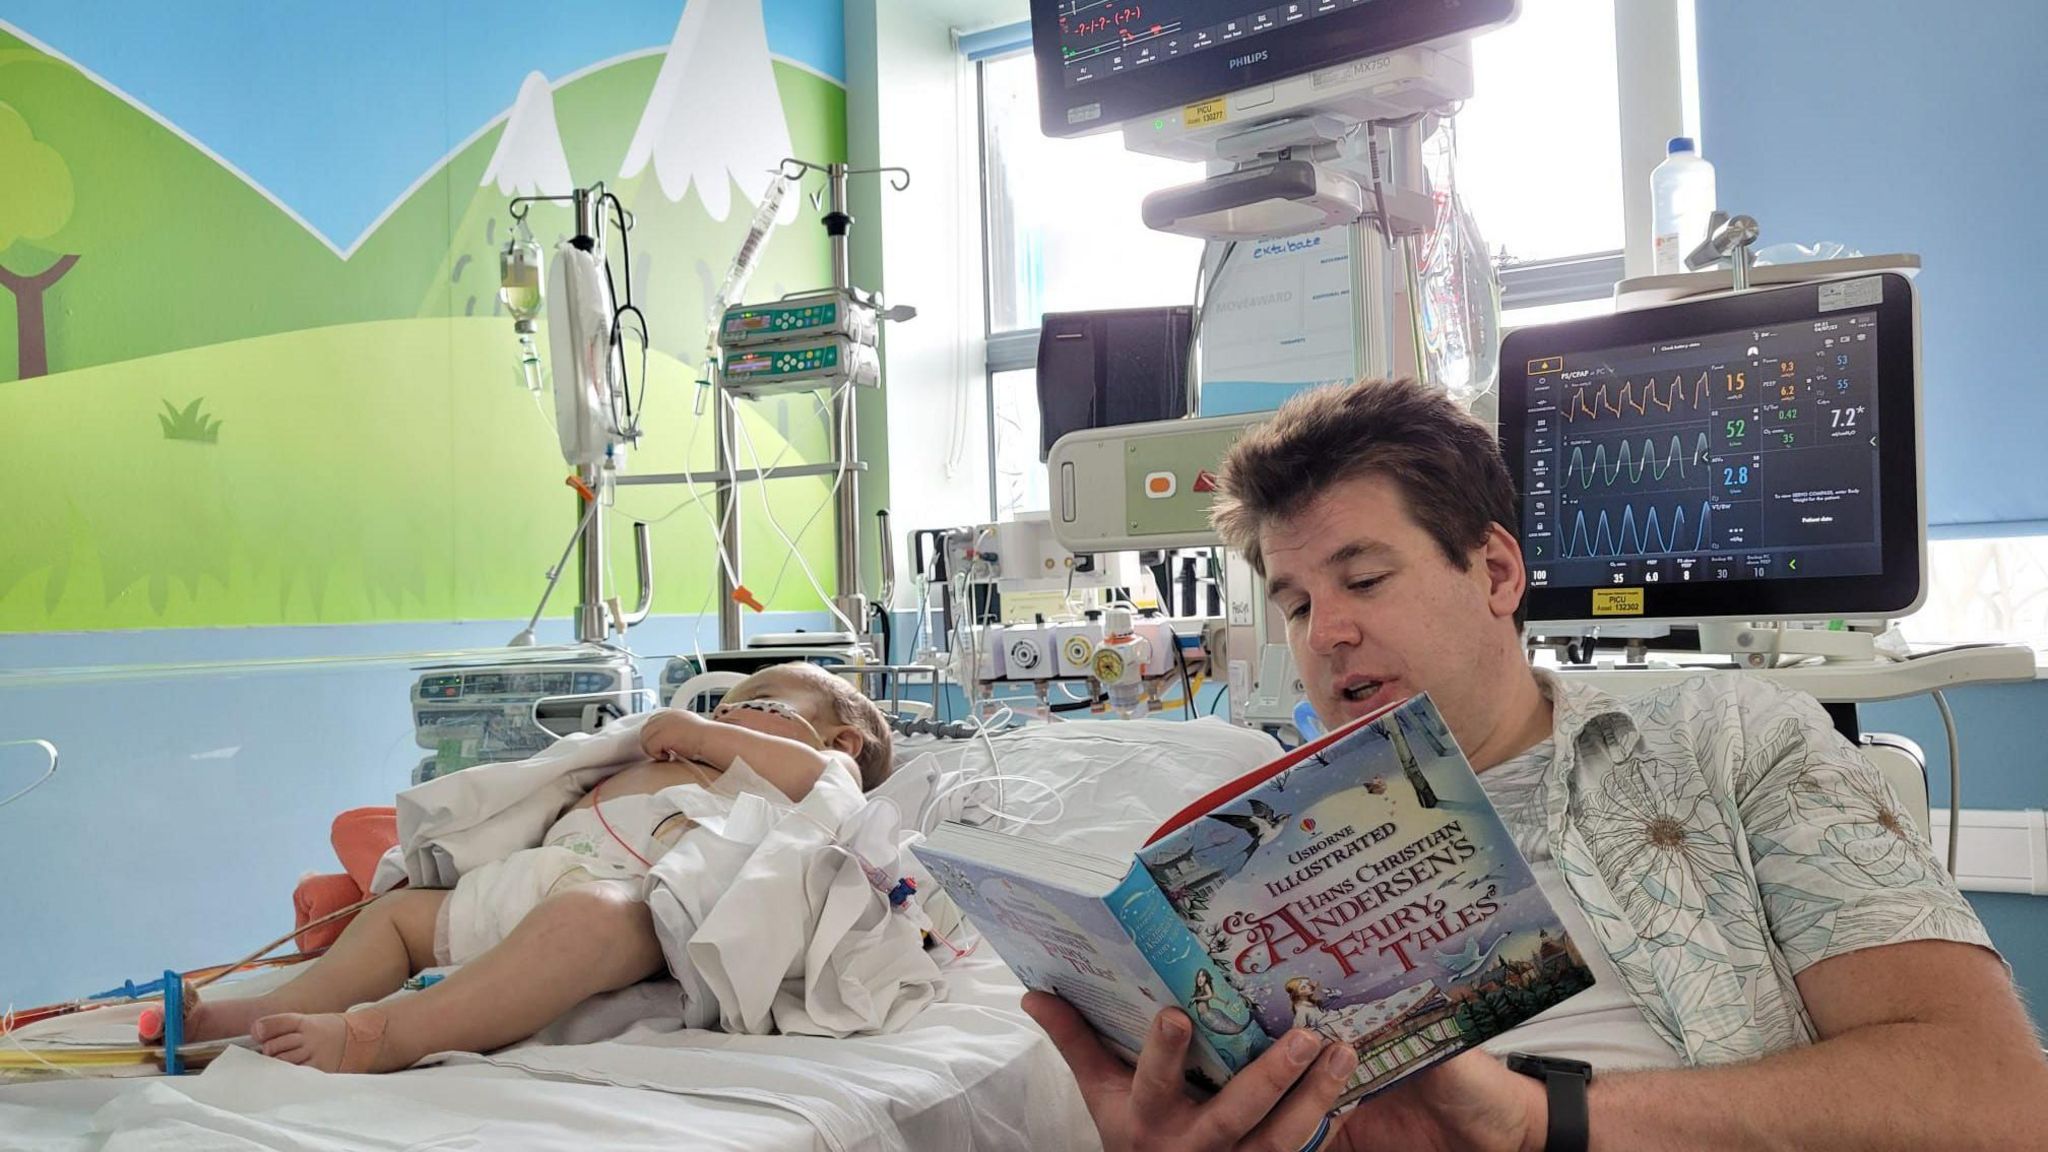 A dad reading to his baby son in hospital